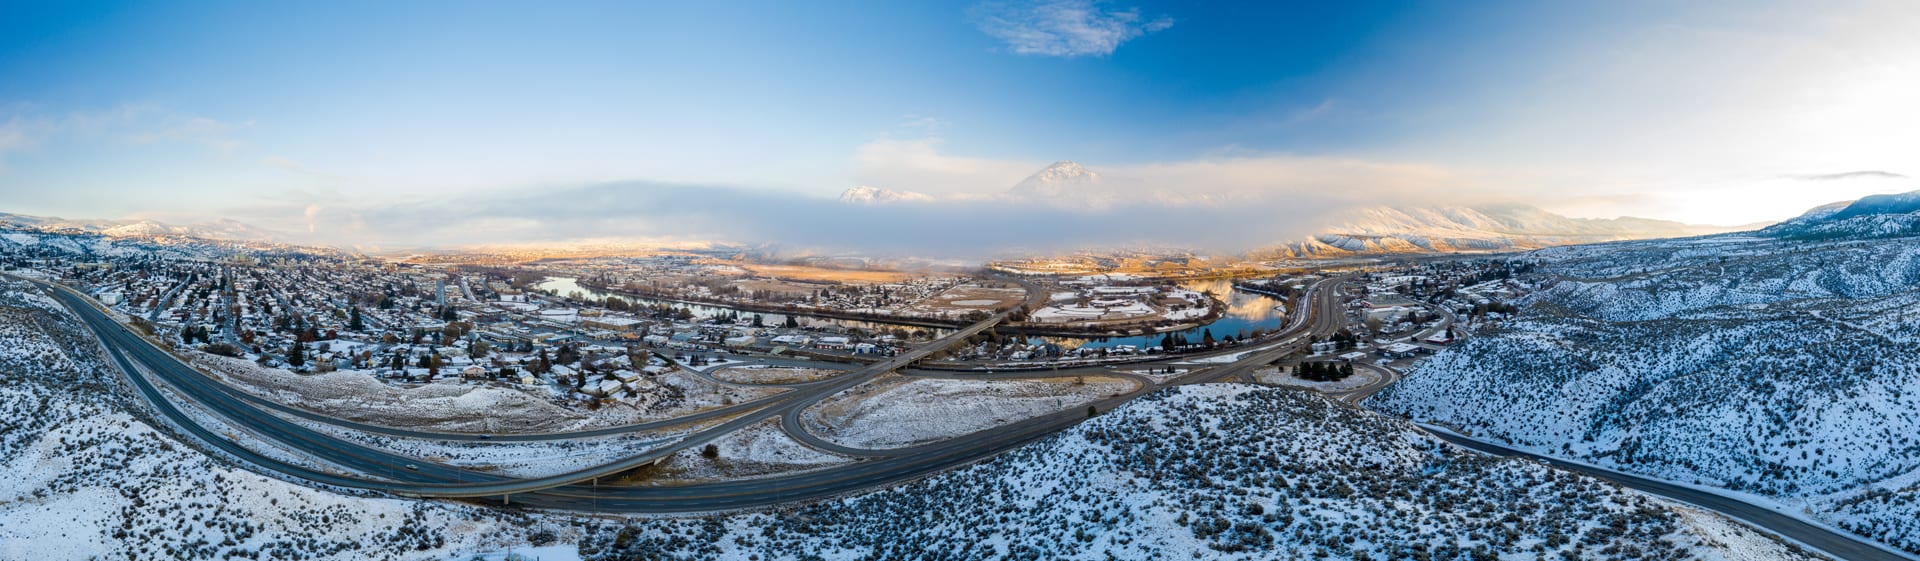 Kamloops City Aerial snowy area with long winding road and sky with clouds